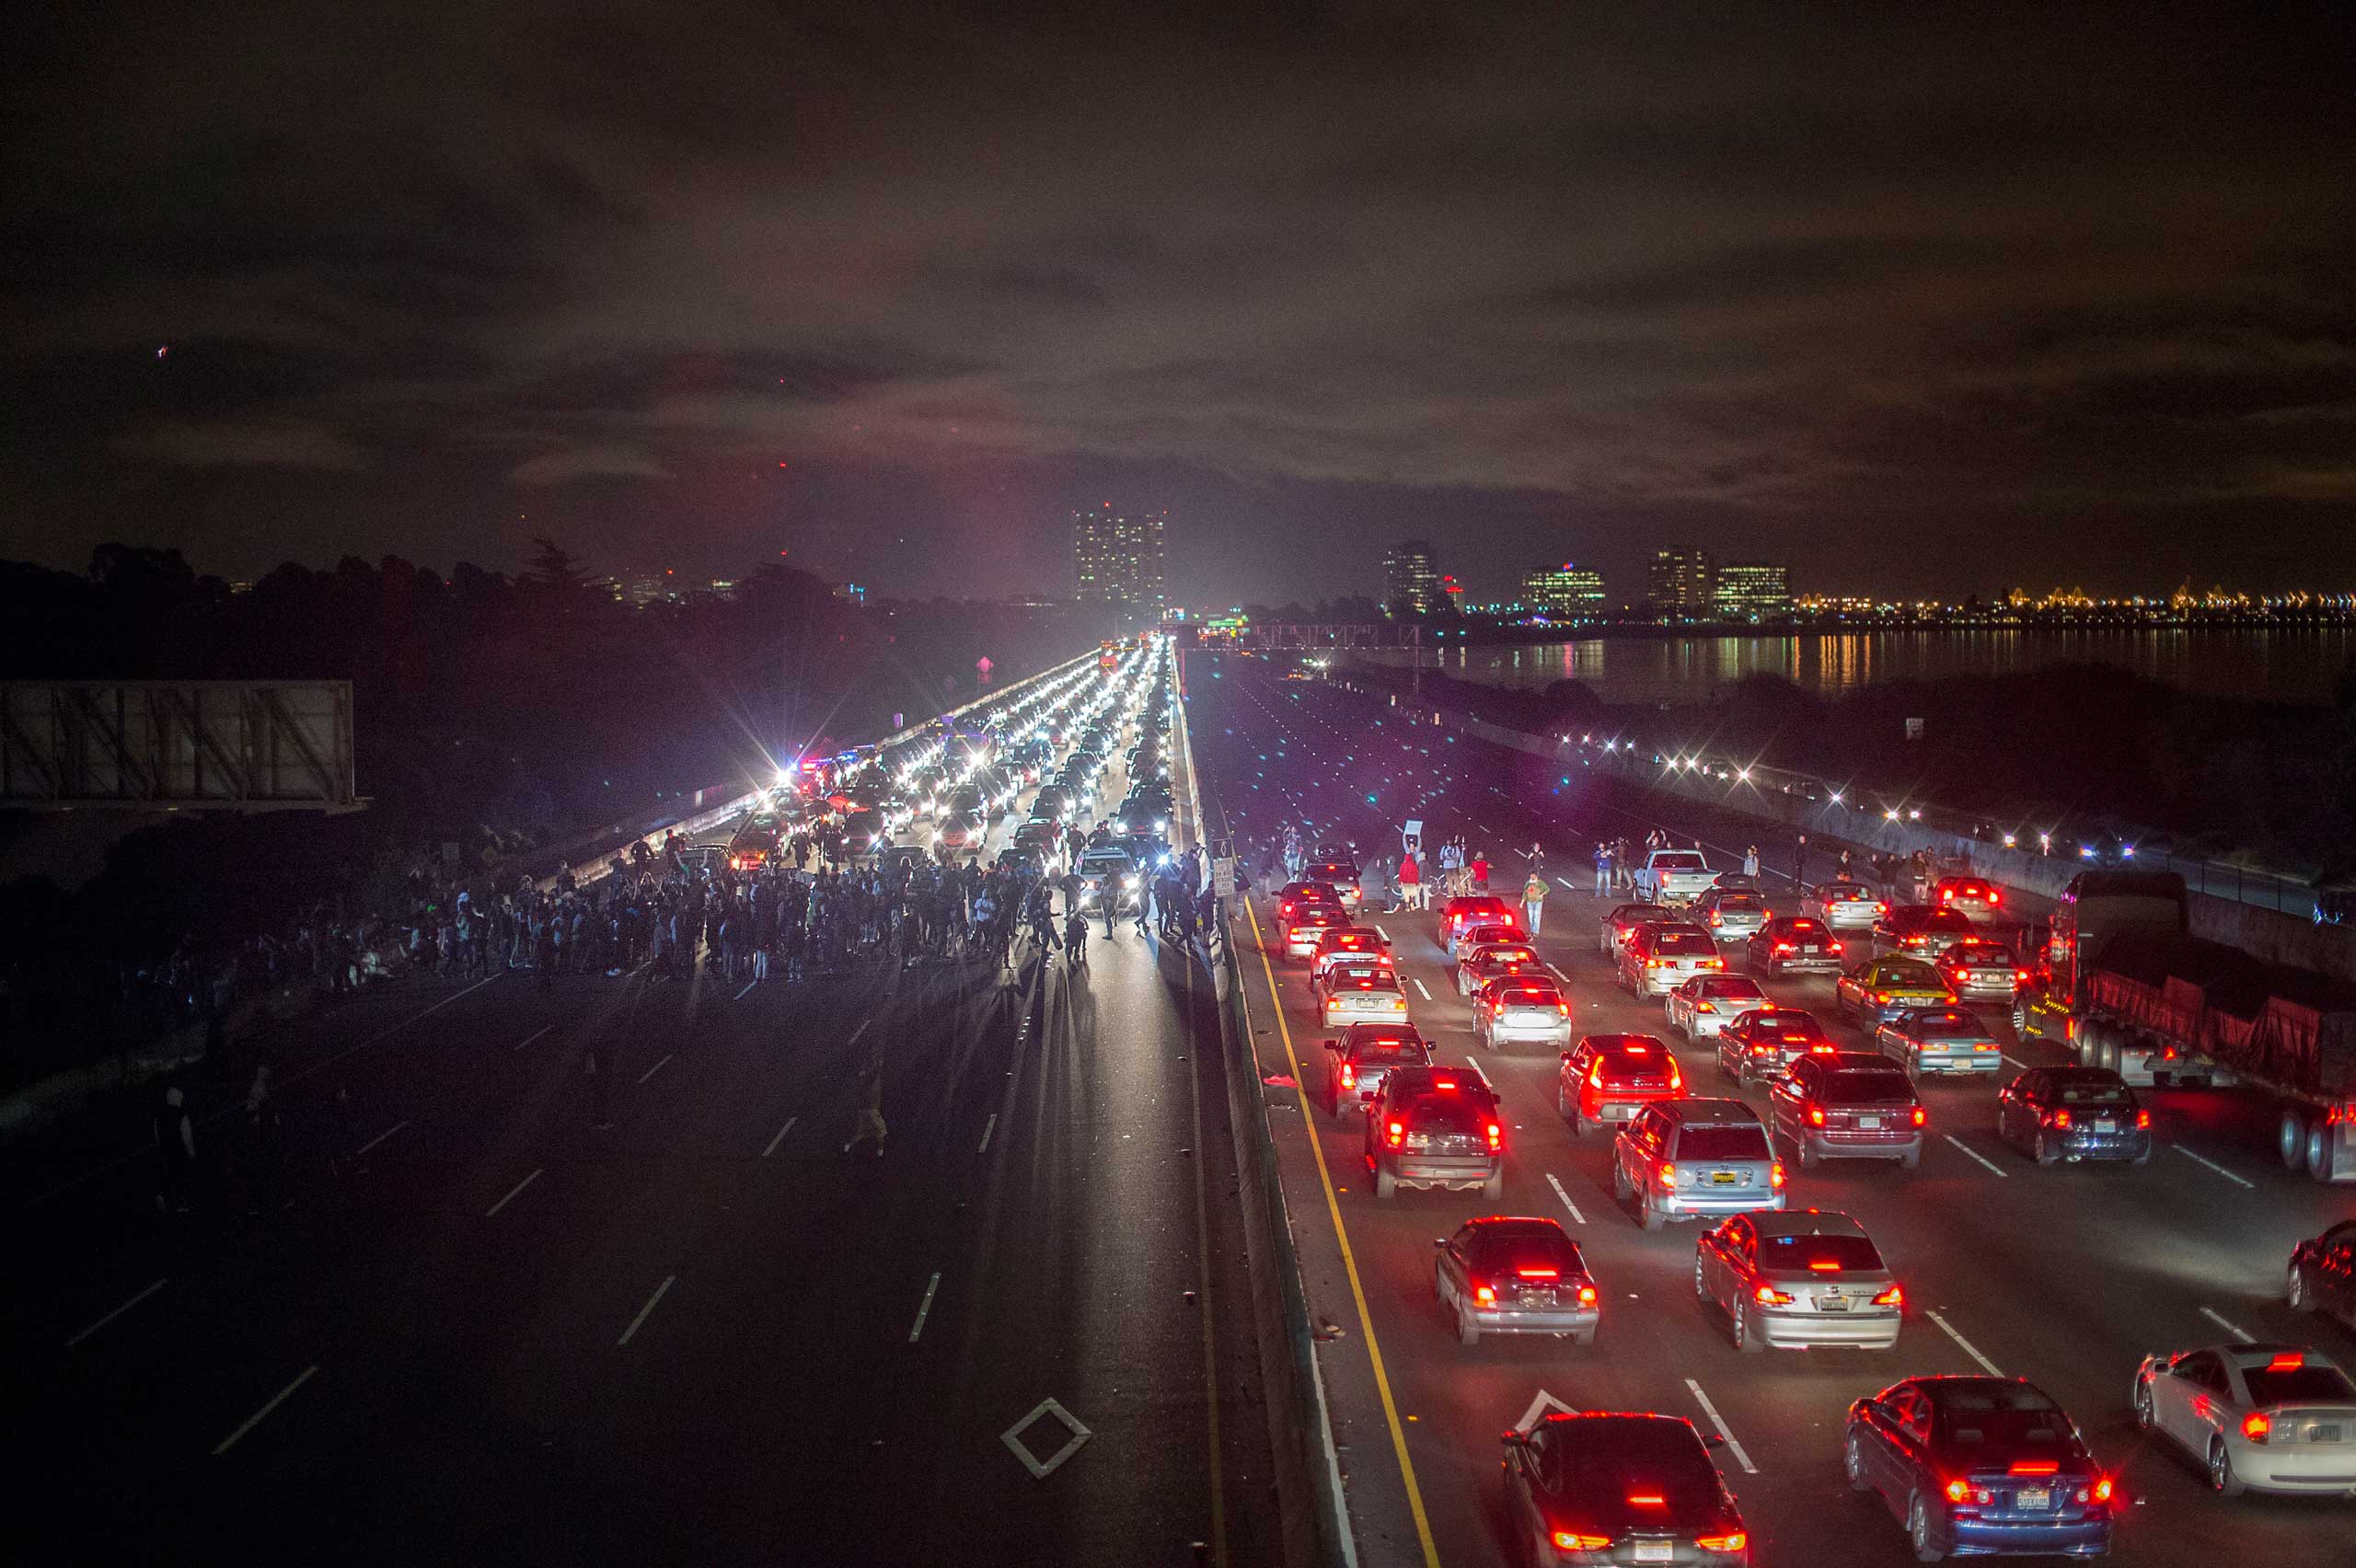 Dec. 8, 2014. Protesters rallying against police violence block both directions of Interstate 80 in Berkeley, Calif.